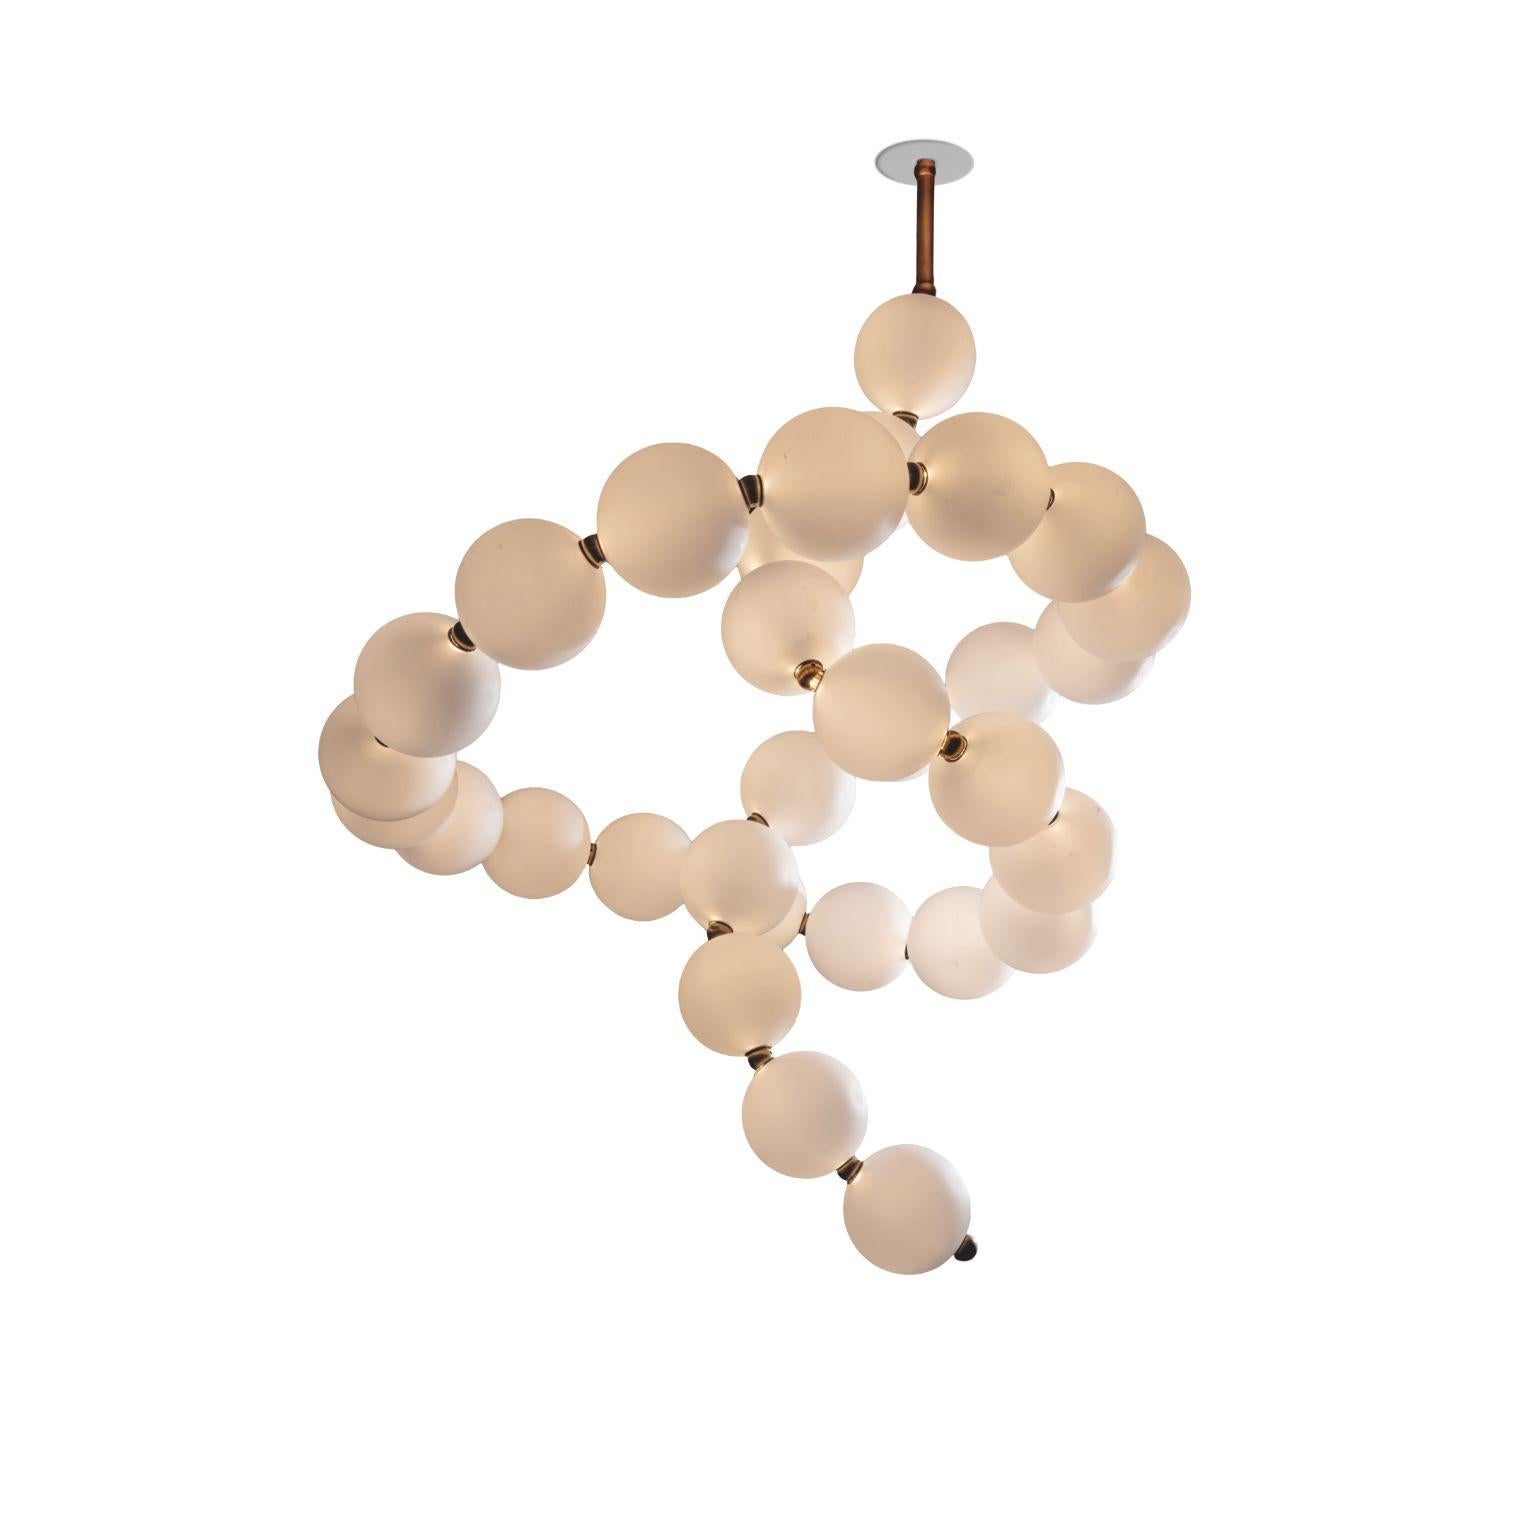 Voltige de Perles chandelier by Ludovic Clément D’armont.
Dimensions: D 80 x W 80 x H 115 cm.
Materials: blown glass, brass, LEDs.

All our lamps can be wired according to each country. If sold to the USA it will be wired for the USA for